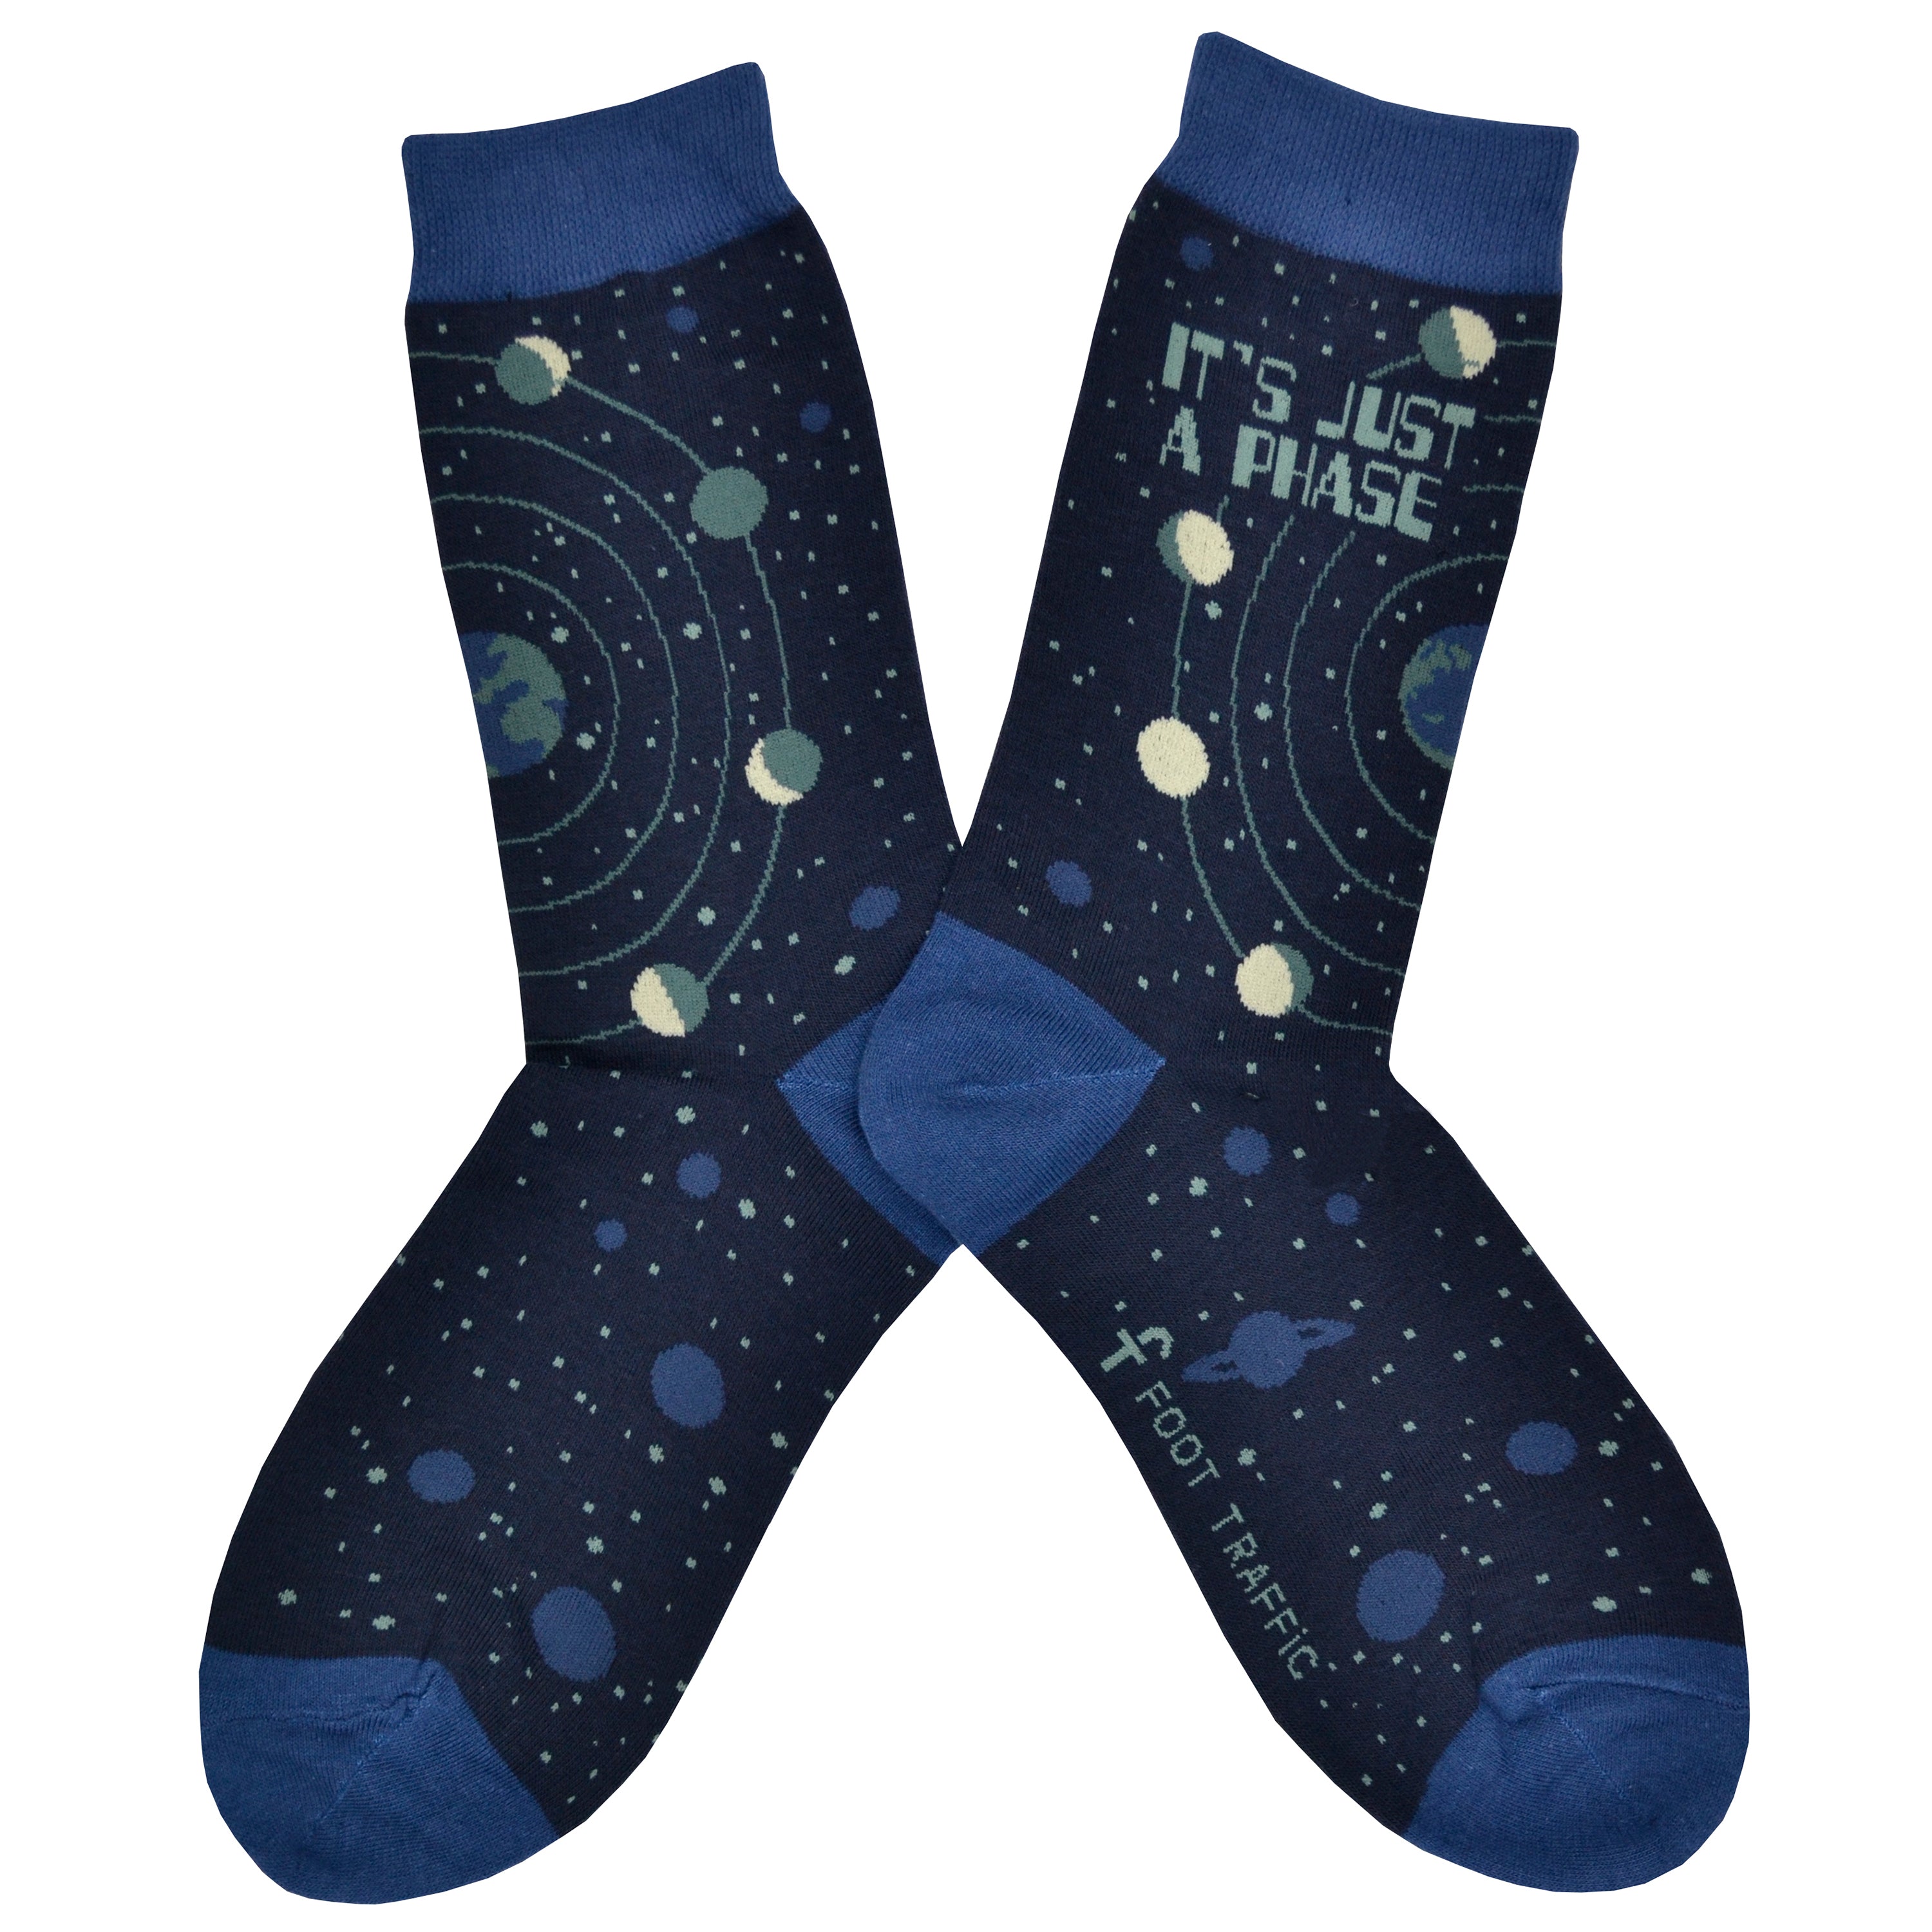 These blue cotton women's crew socks by the brand Foot Traffic feature small blue outlines of the planets  on the leg and foot and rings around the earth with the moon revolving in all its phases. The words 